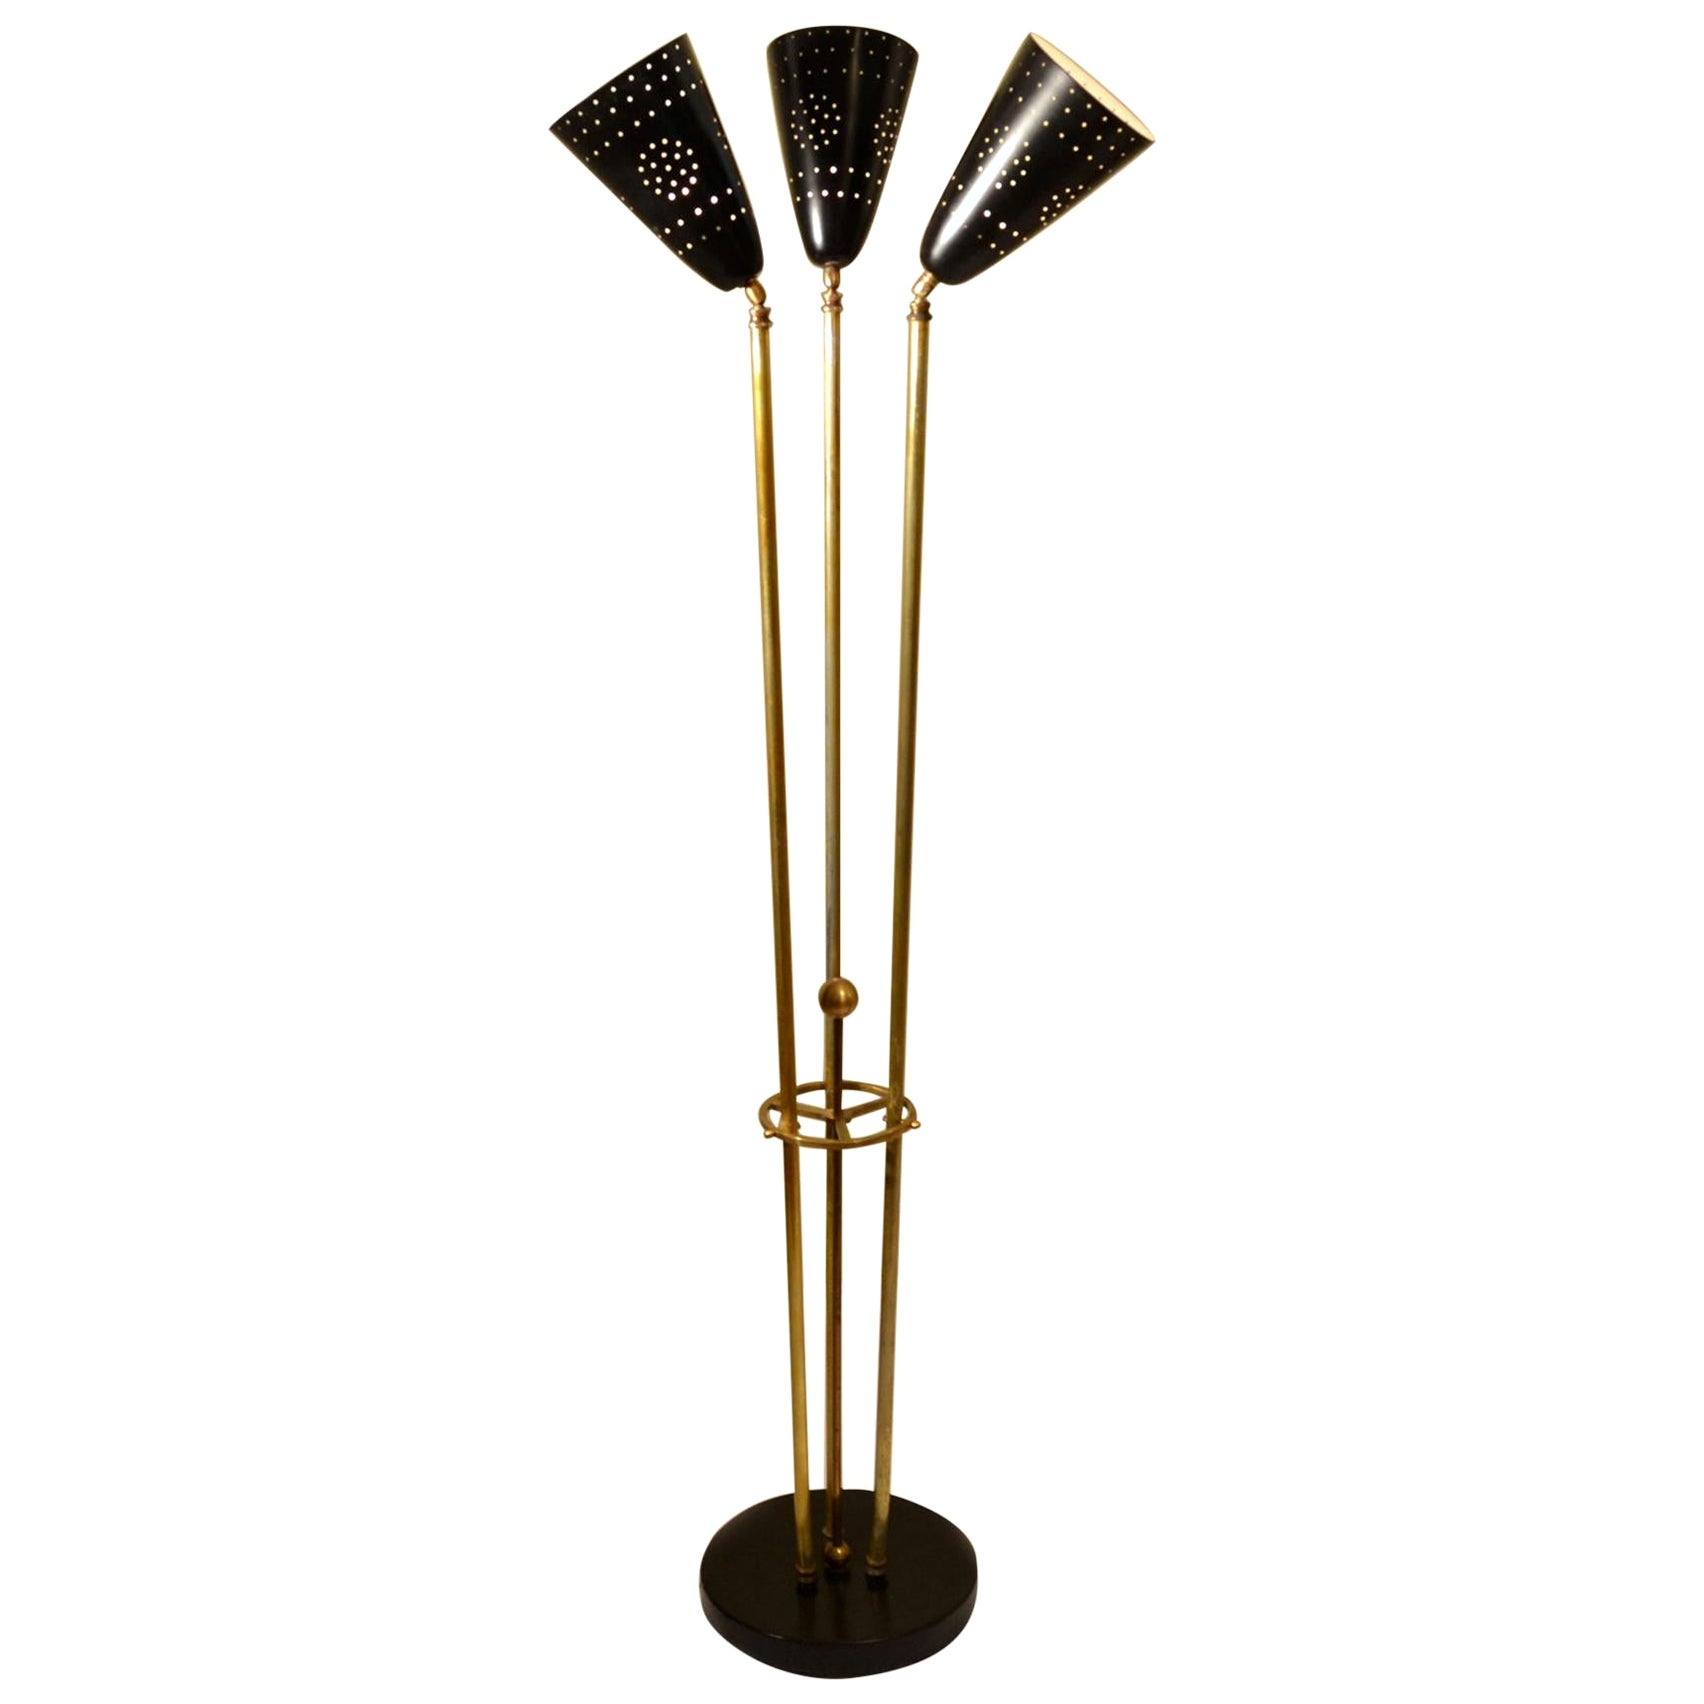 Italian 1950s Floor Lamp with Articulated Black Perforated Shades and Brass